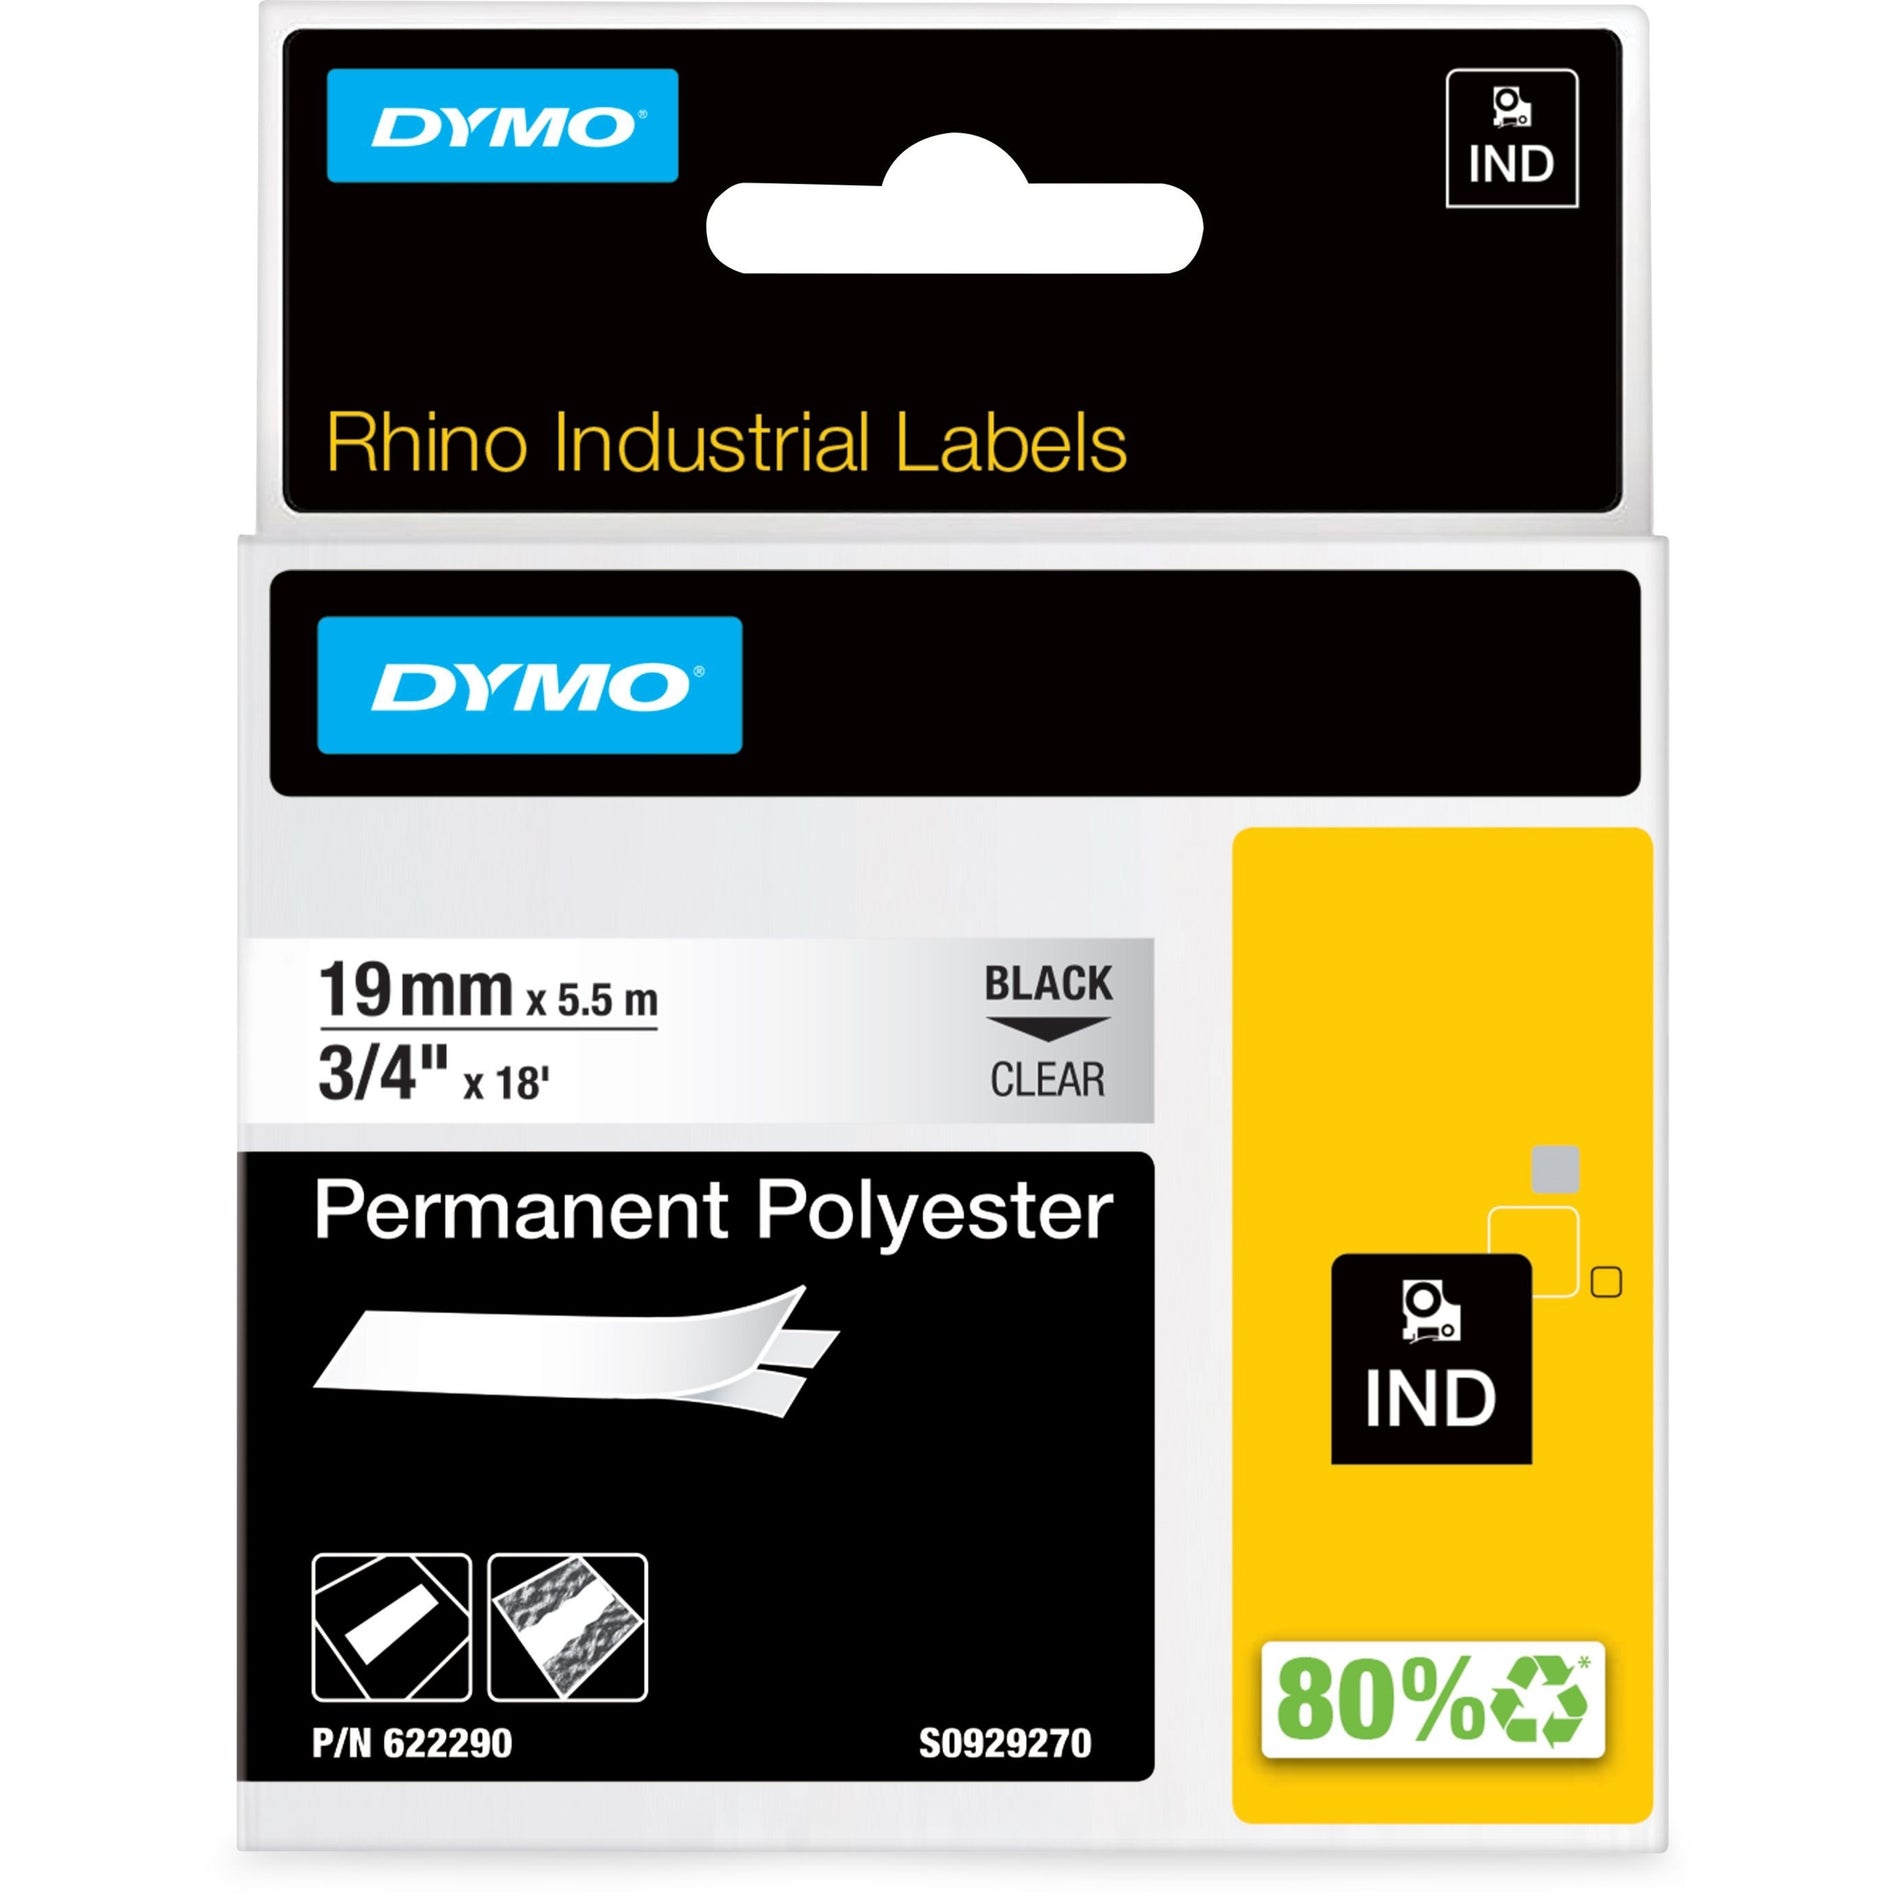 Dymo 622290 RhinoPro Thermal Label, Multipurpose Label, 3/4" x 18 ft, Permanent Adhesive, Clear Polyester